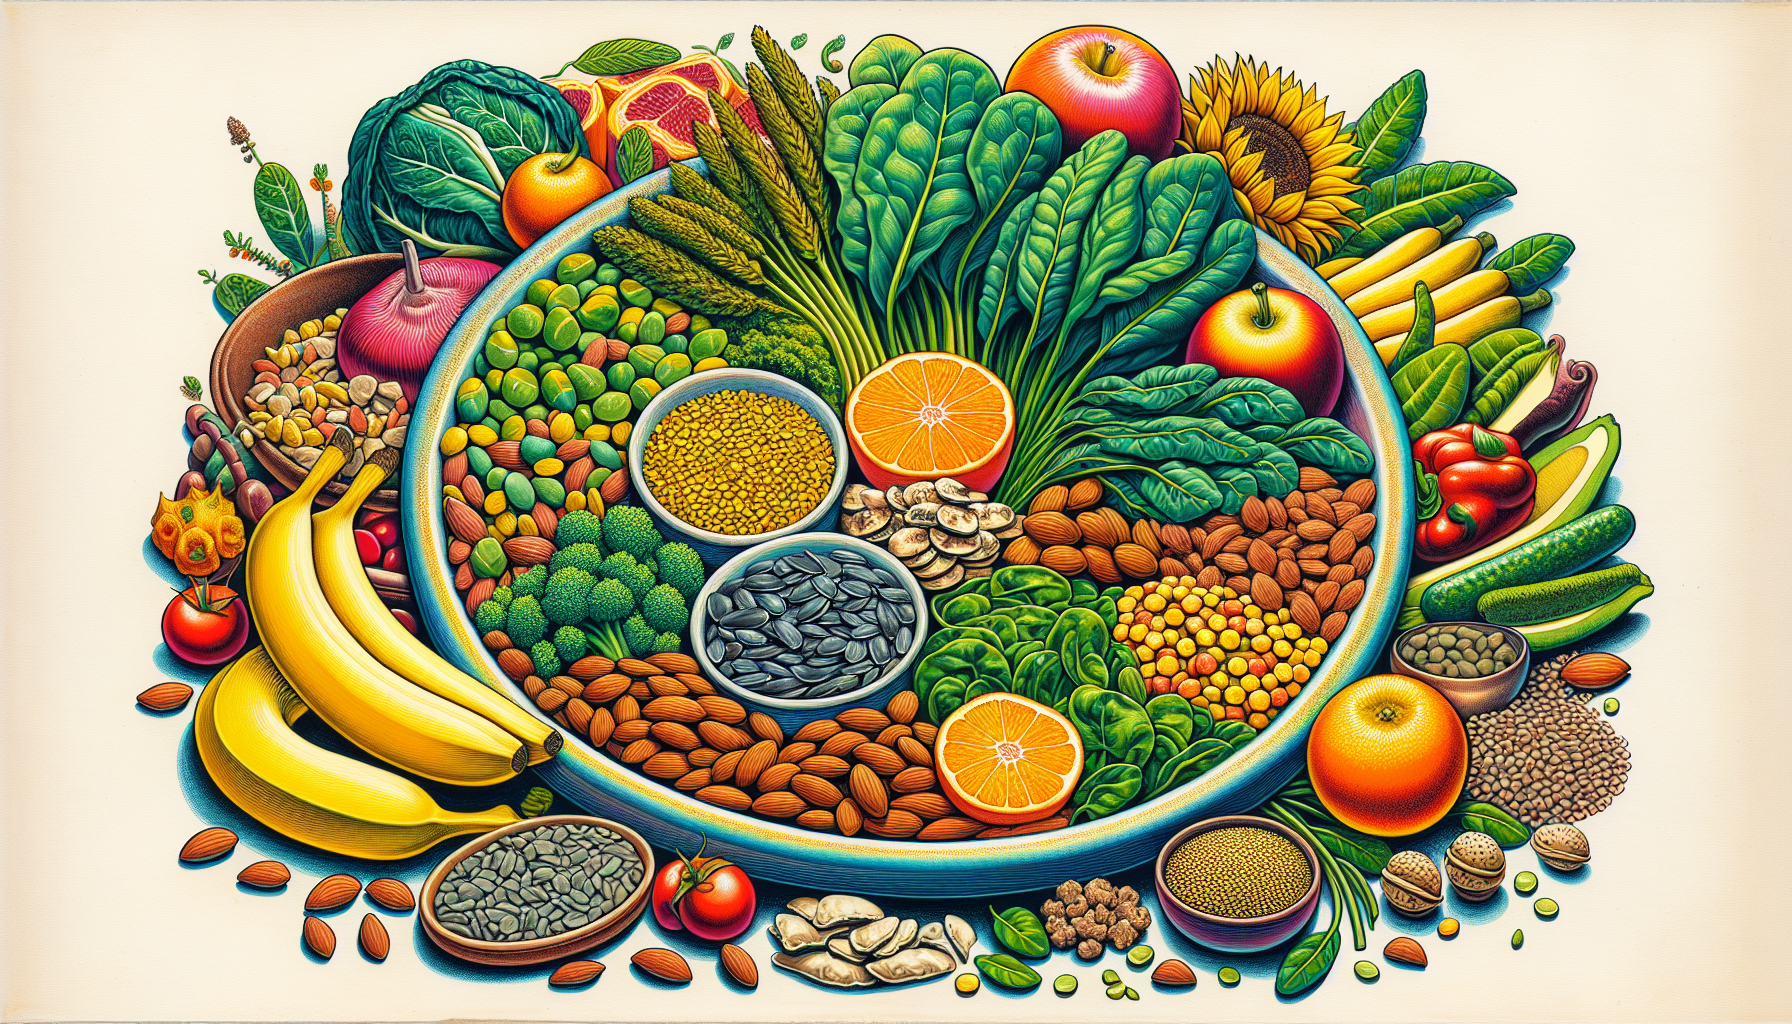 Illustration of a plate with assorted magnesium-rich foods